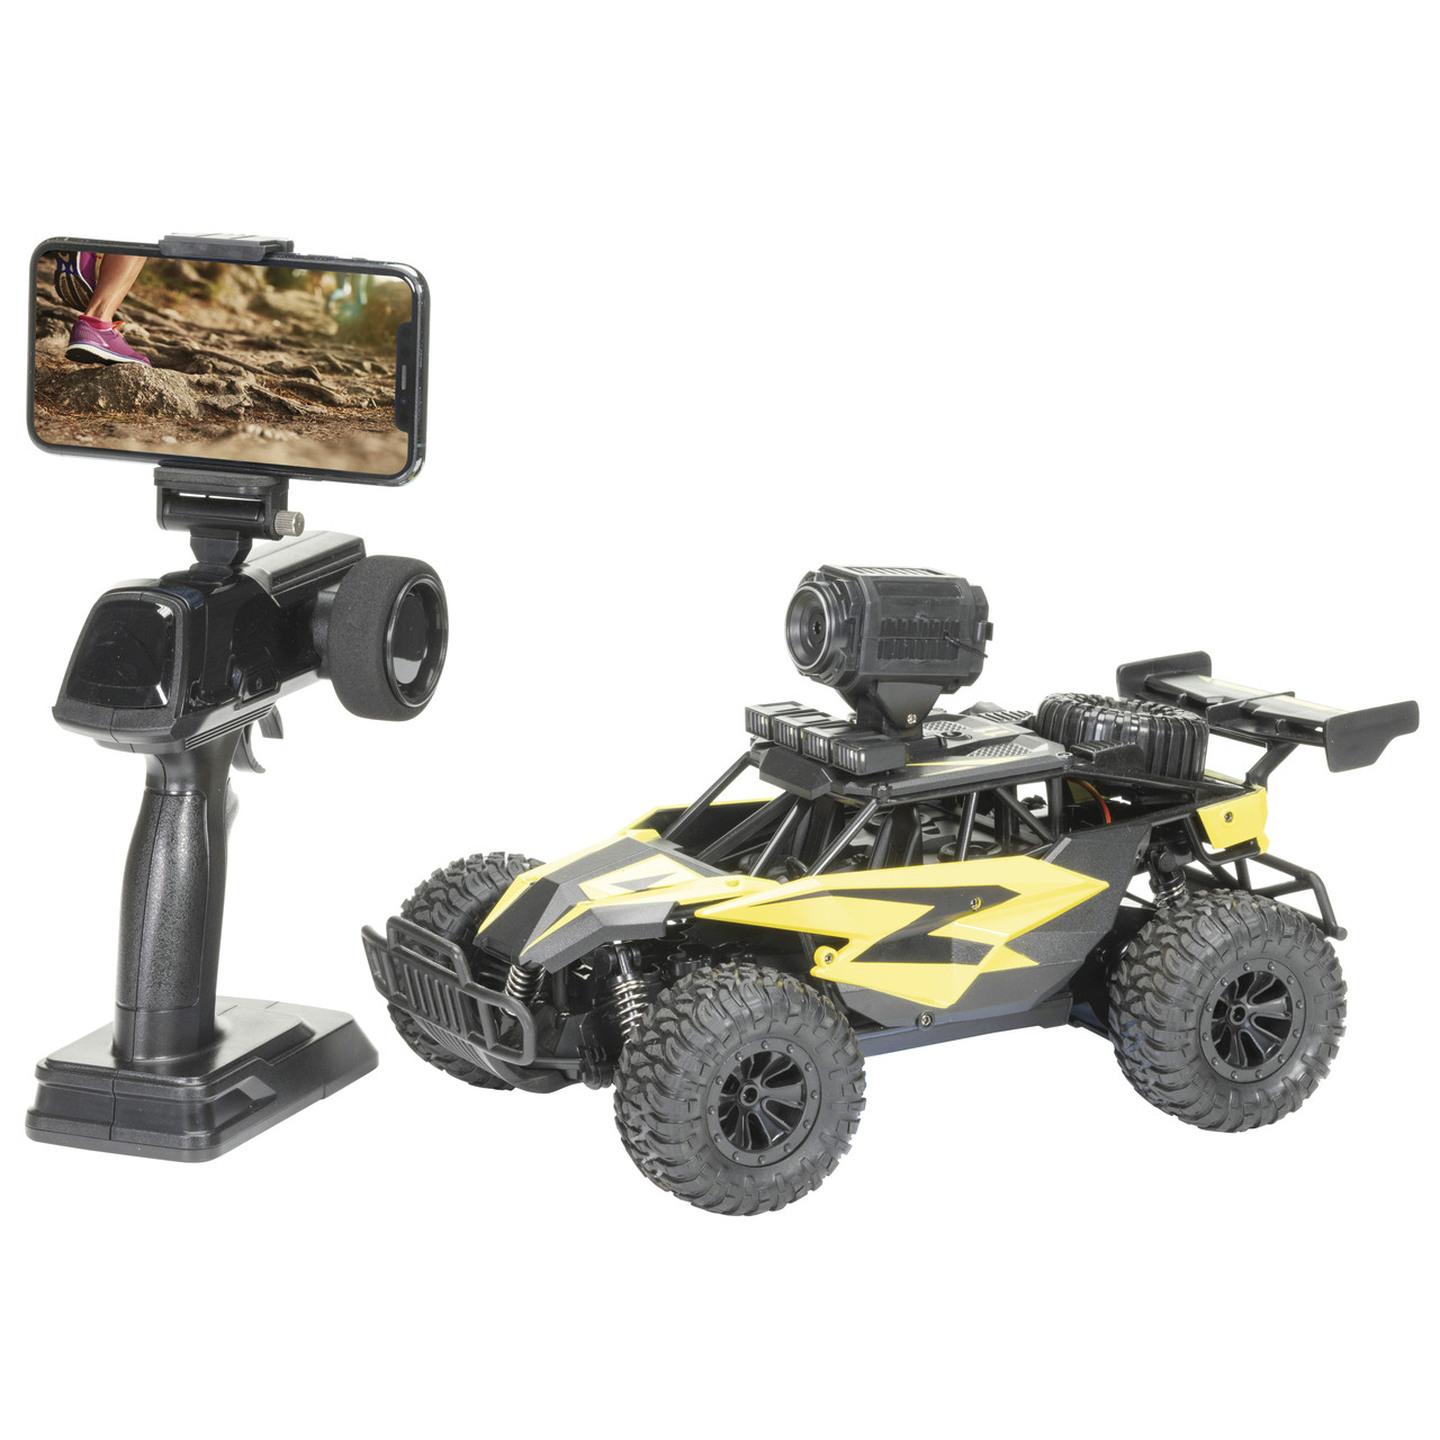 1:16 Scale R/C Car with 1080p Camera & VR Goggles